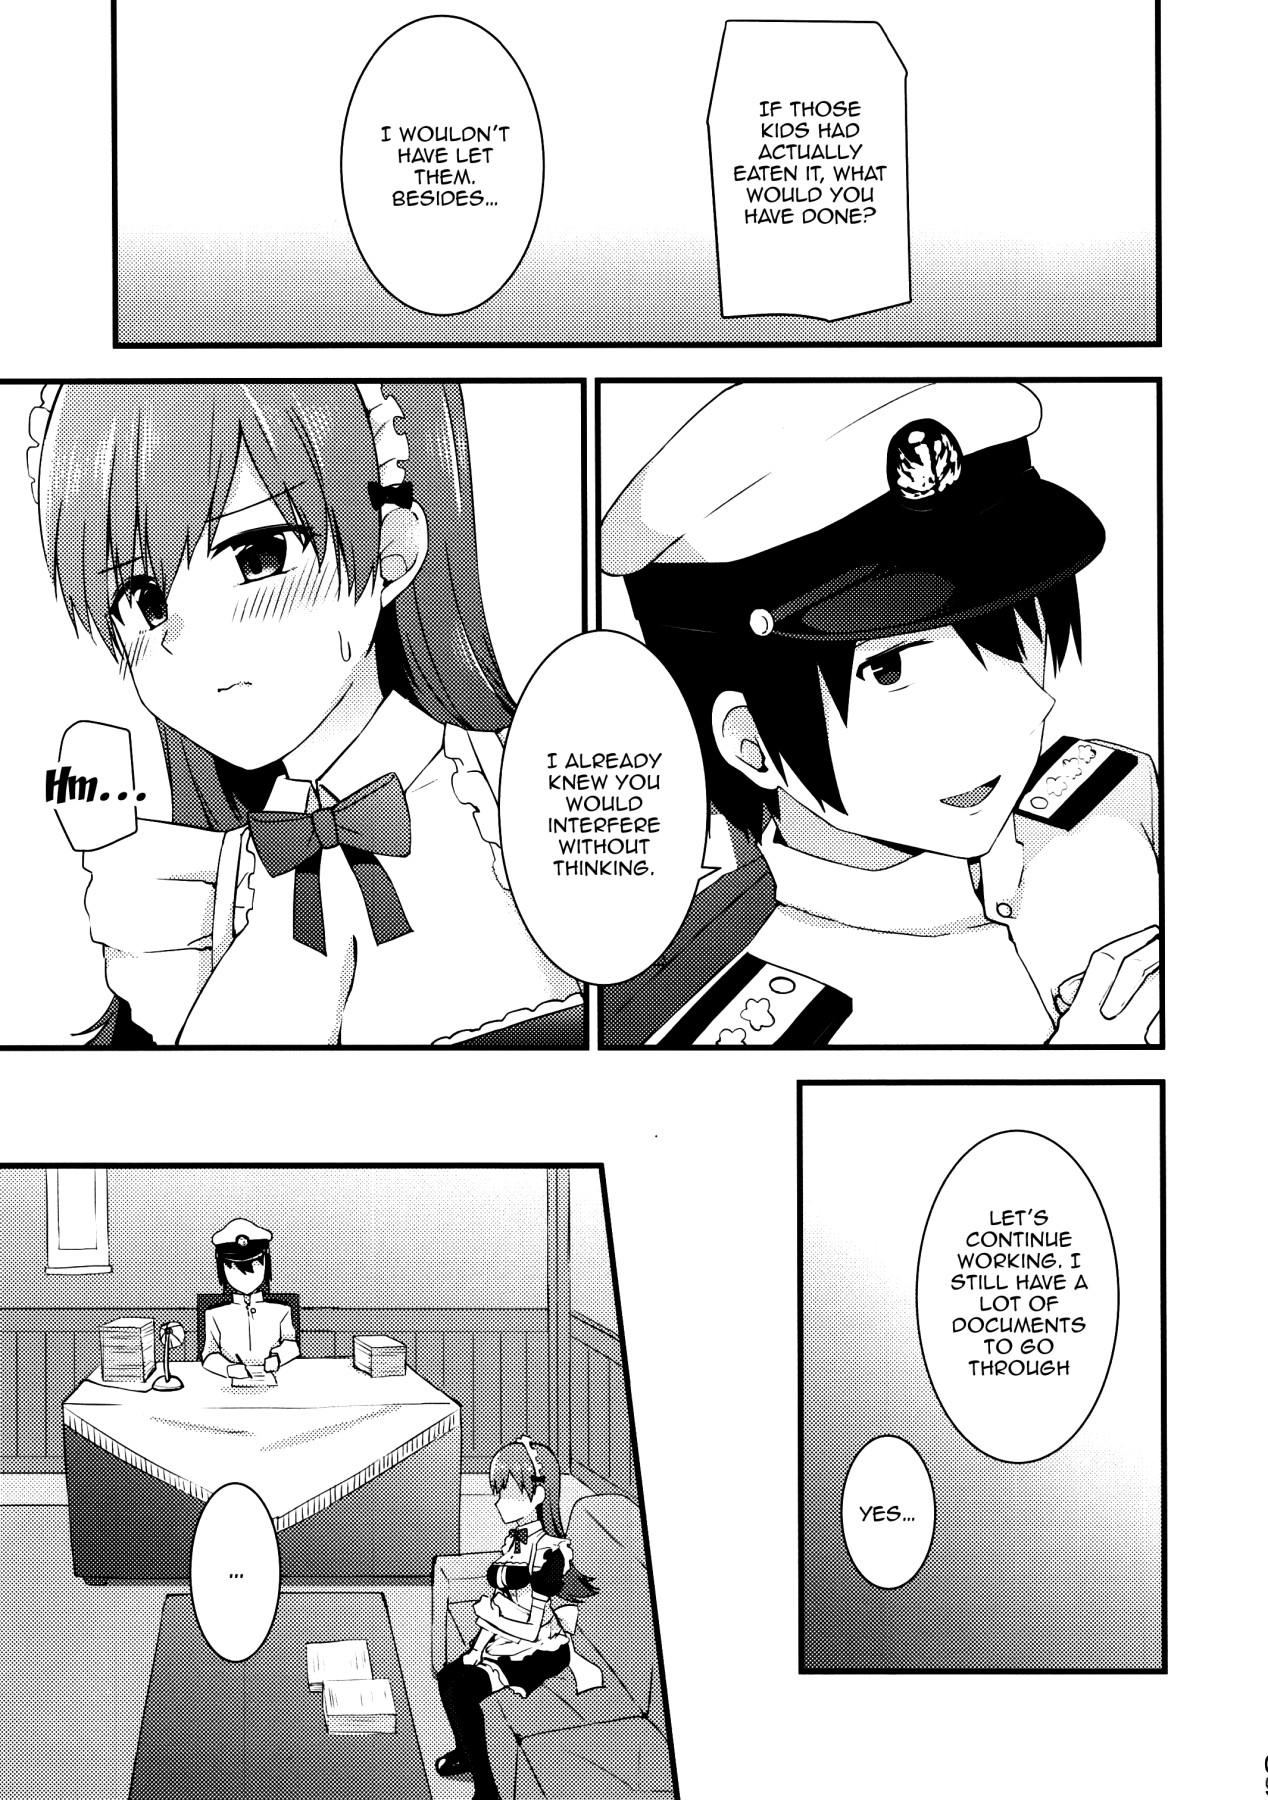 American Ooi! Maid Fuku o Kite miyou! | Ooi! Try On These Maid Clothes! - Kantai collection Gay Baitbus - Page 10